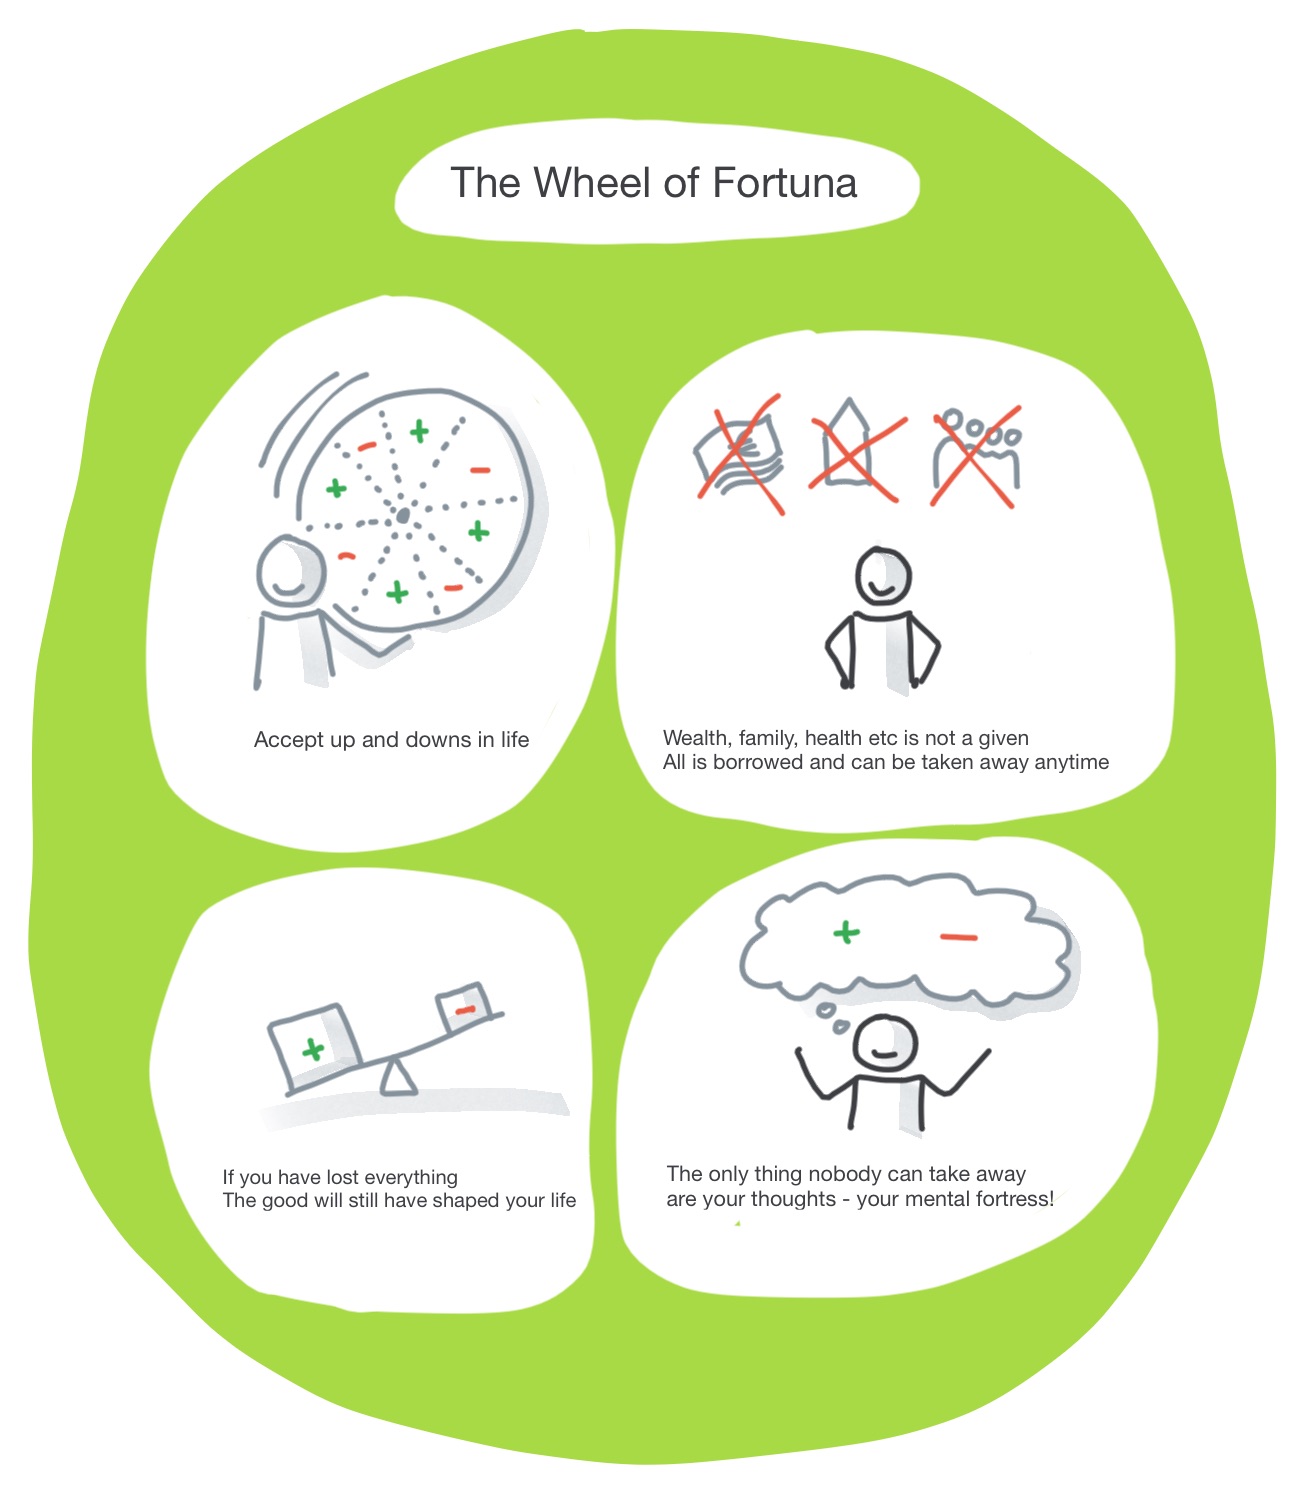 Wheel of fortuna from Curiosity with Gusto by Felix Harling